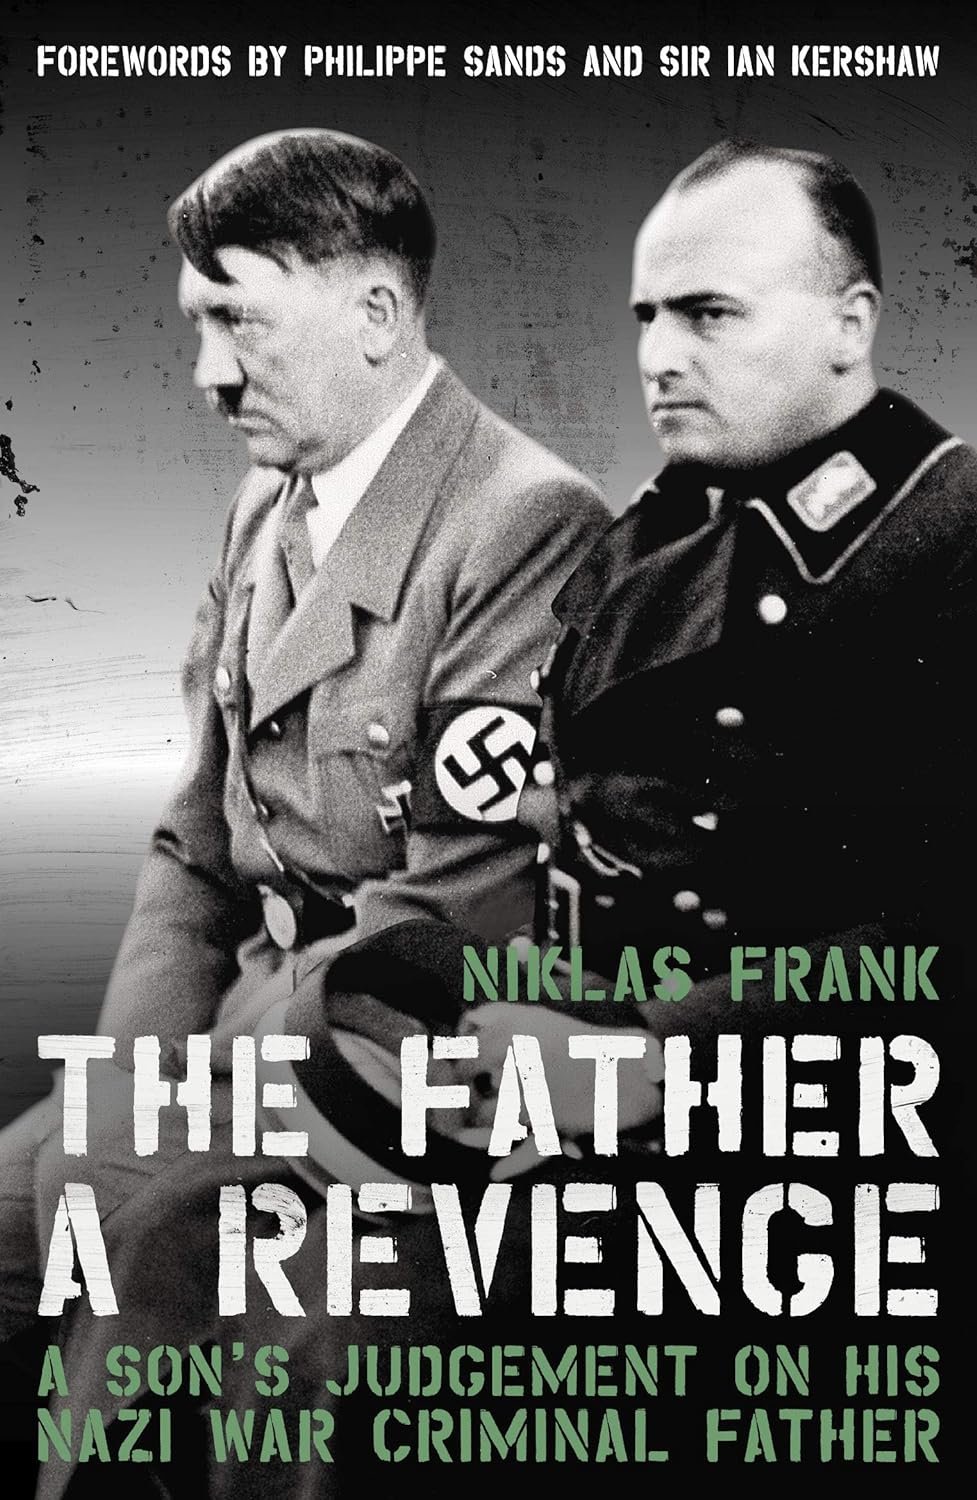 Black and white photo cover of "The Father: A Revenge" by Niklas Frank, featuring images of two men in Nazi uniforms, including Hans Frank, focusing on a troubling